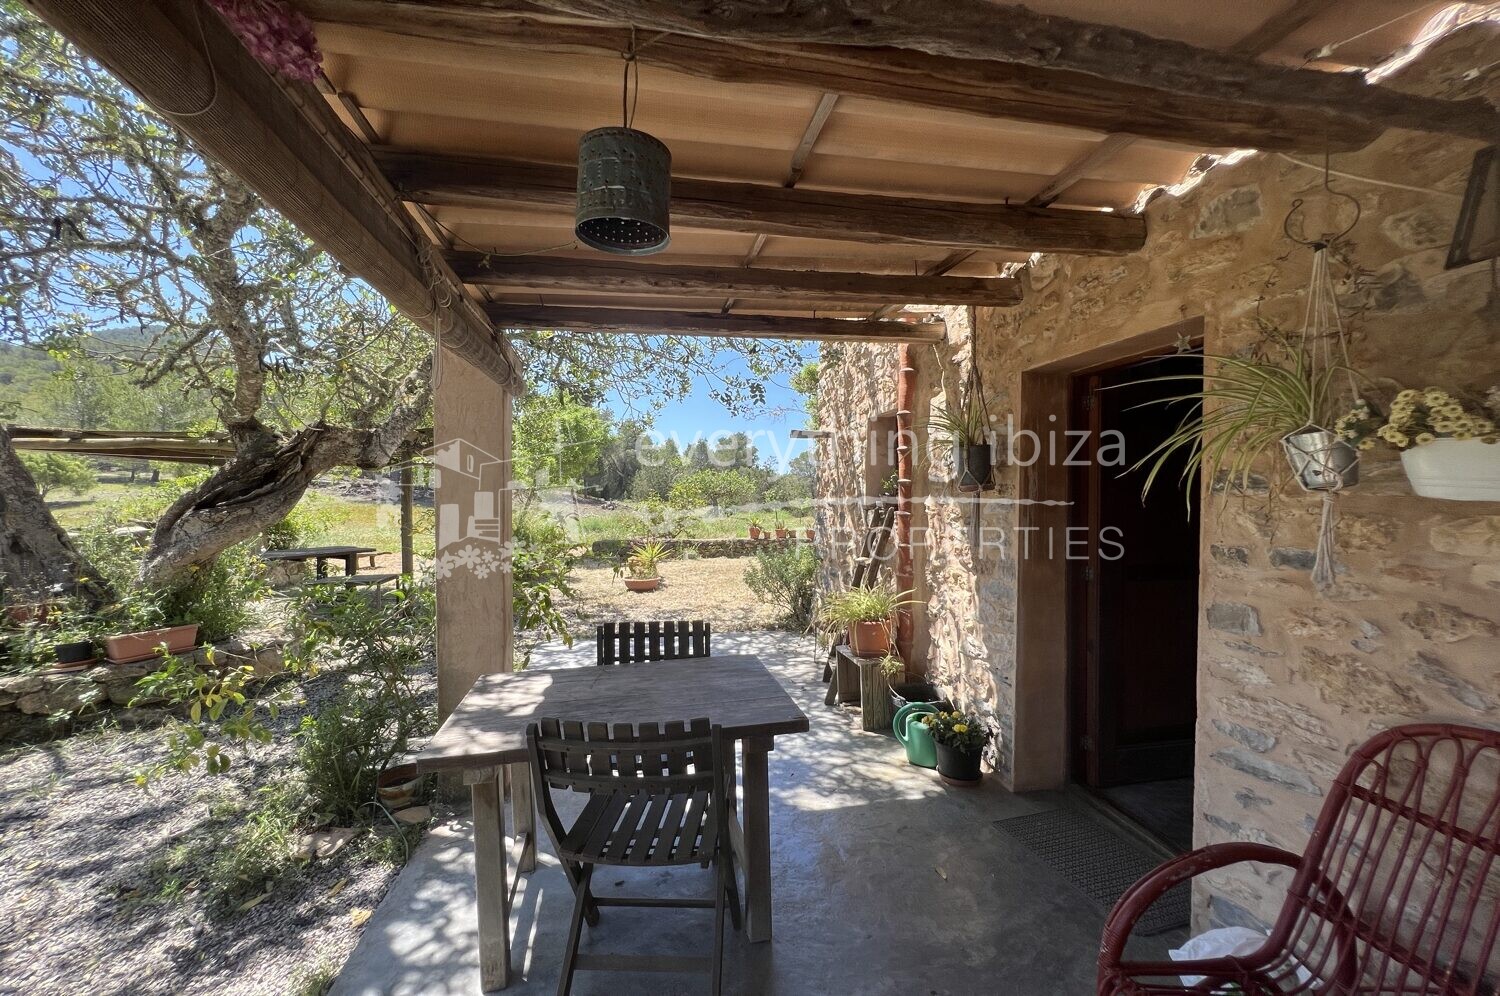 Traditional Finca & Casita on a Large Country Plot, ref. 1457, for sale in Ibiza by everything ibiza Properties